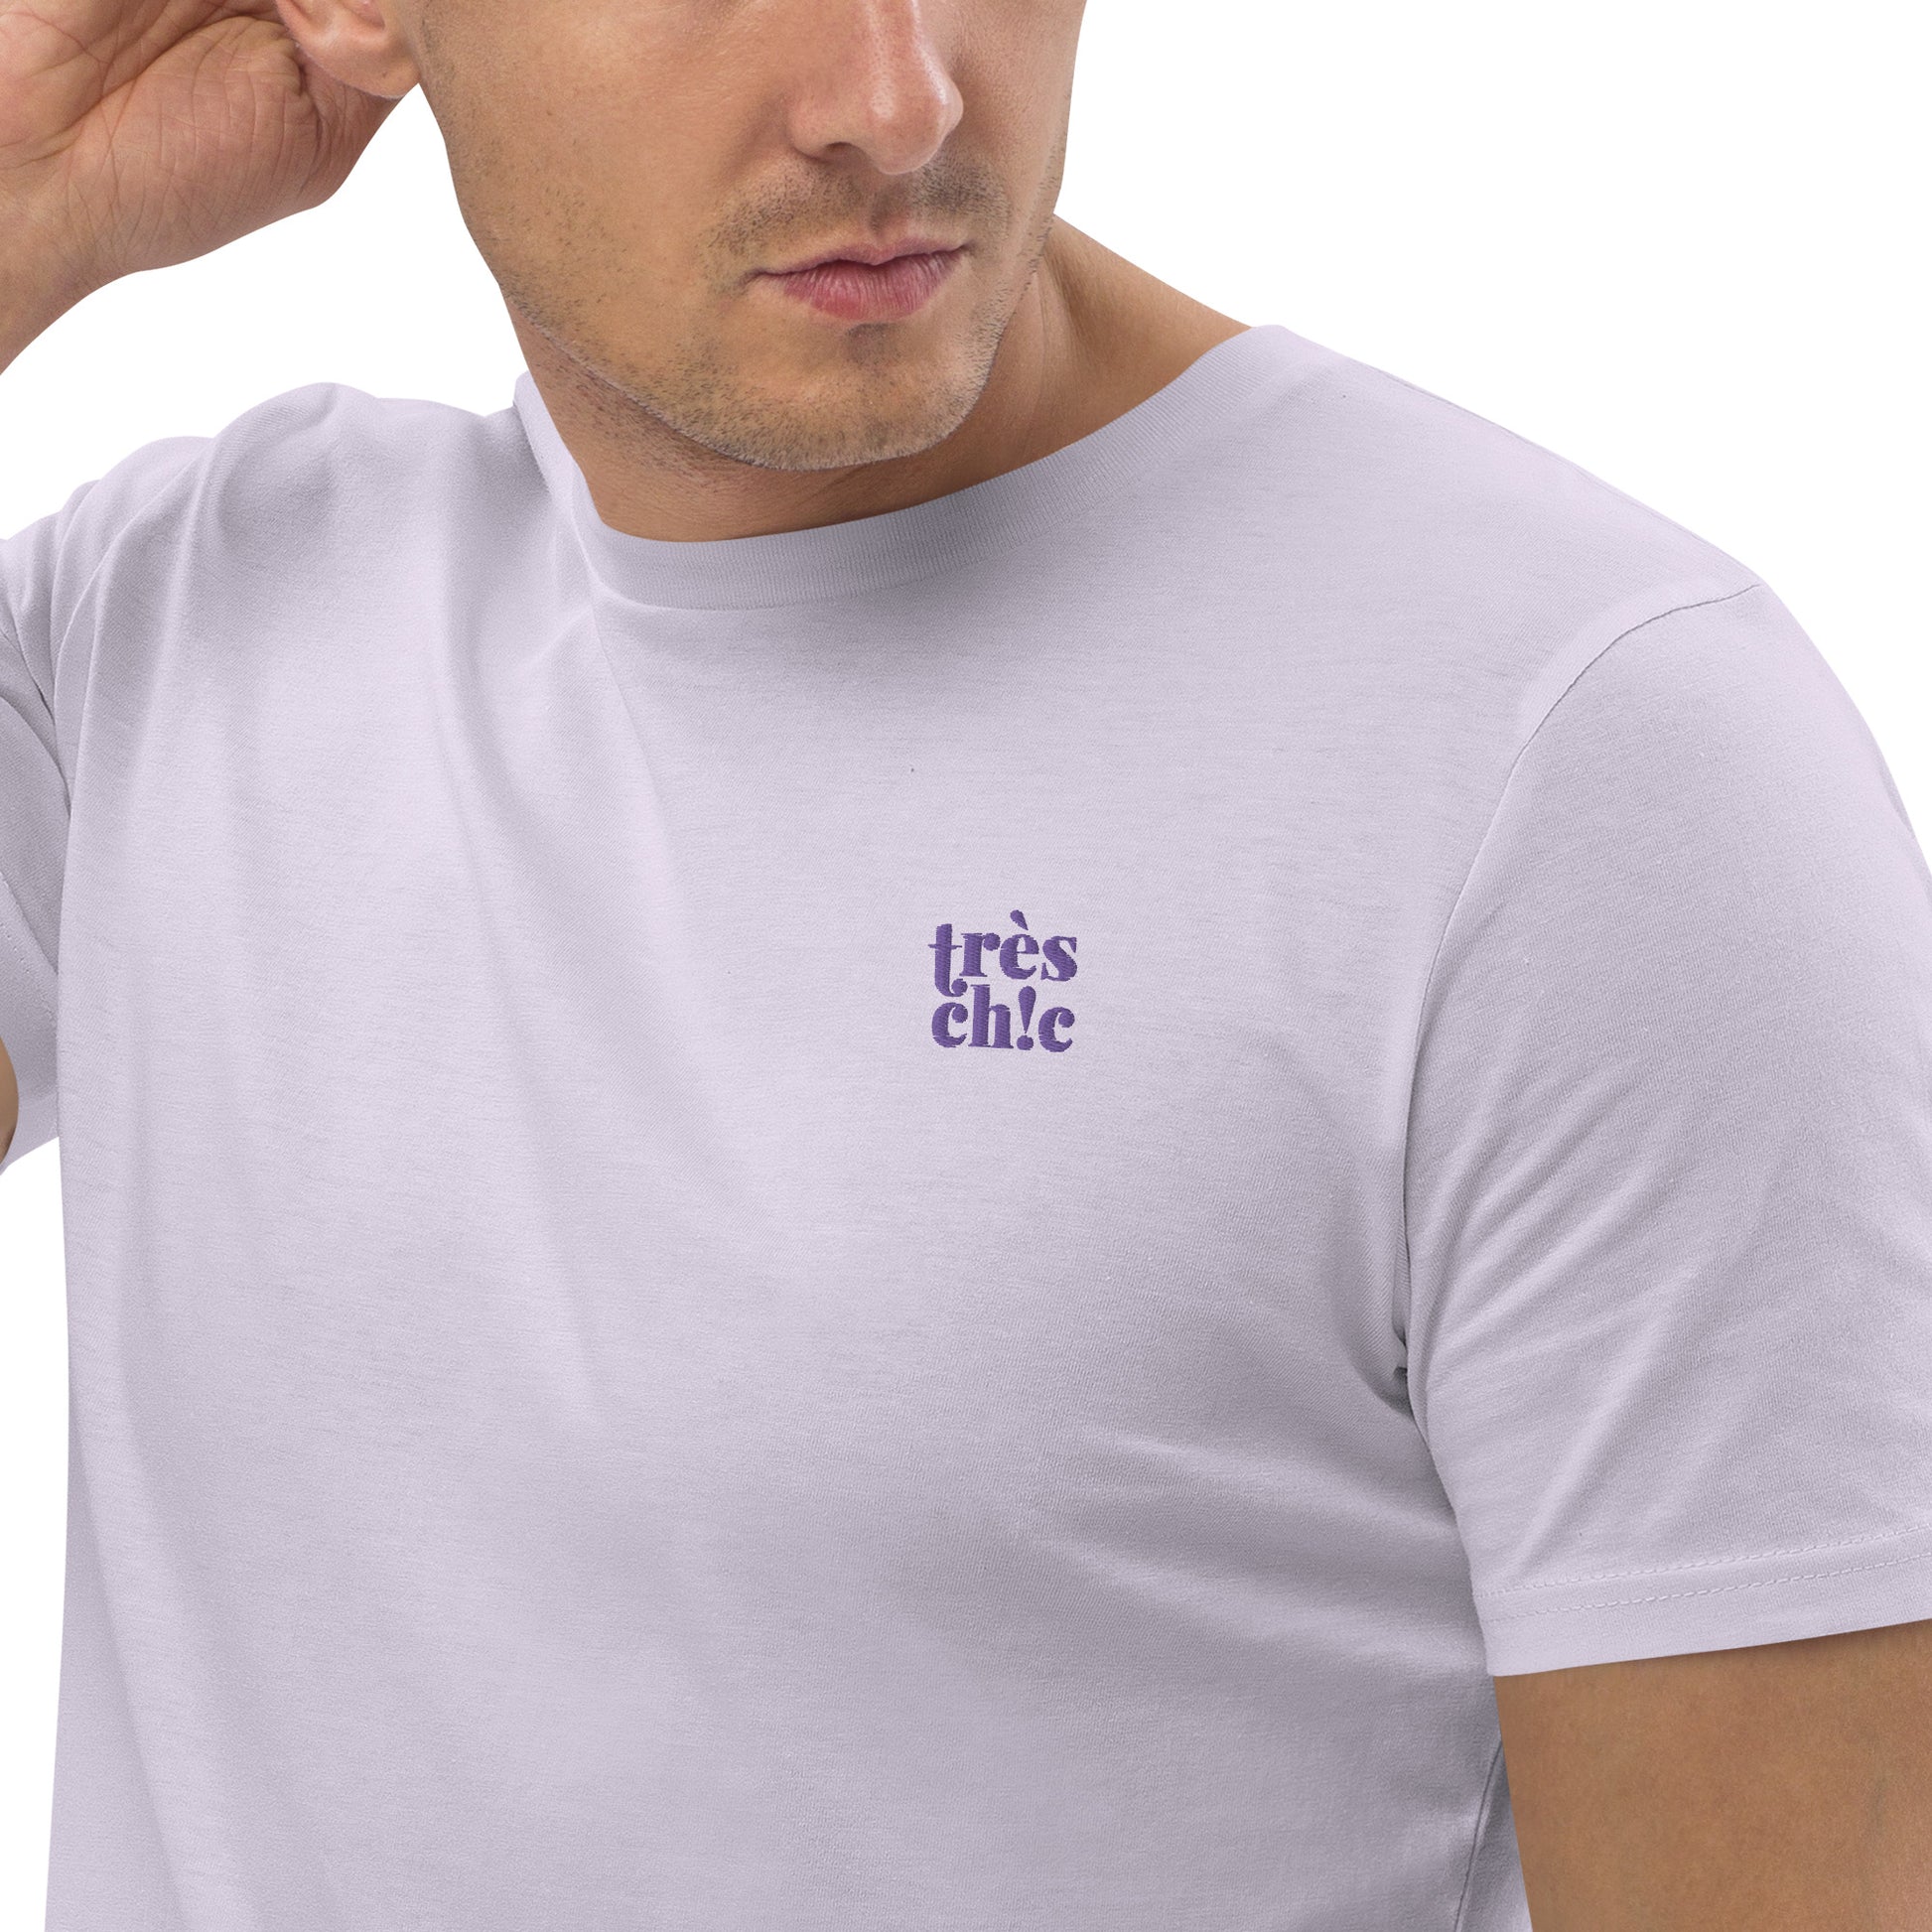 Male model wearing a fitted lavender organic cotton t-shirt with a small embroidery - "très chic" on the left chest. Available in sizes S to 3XL.